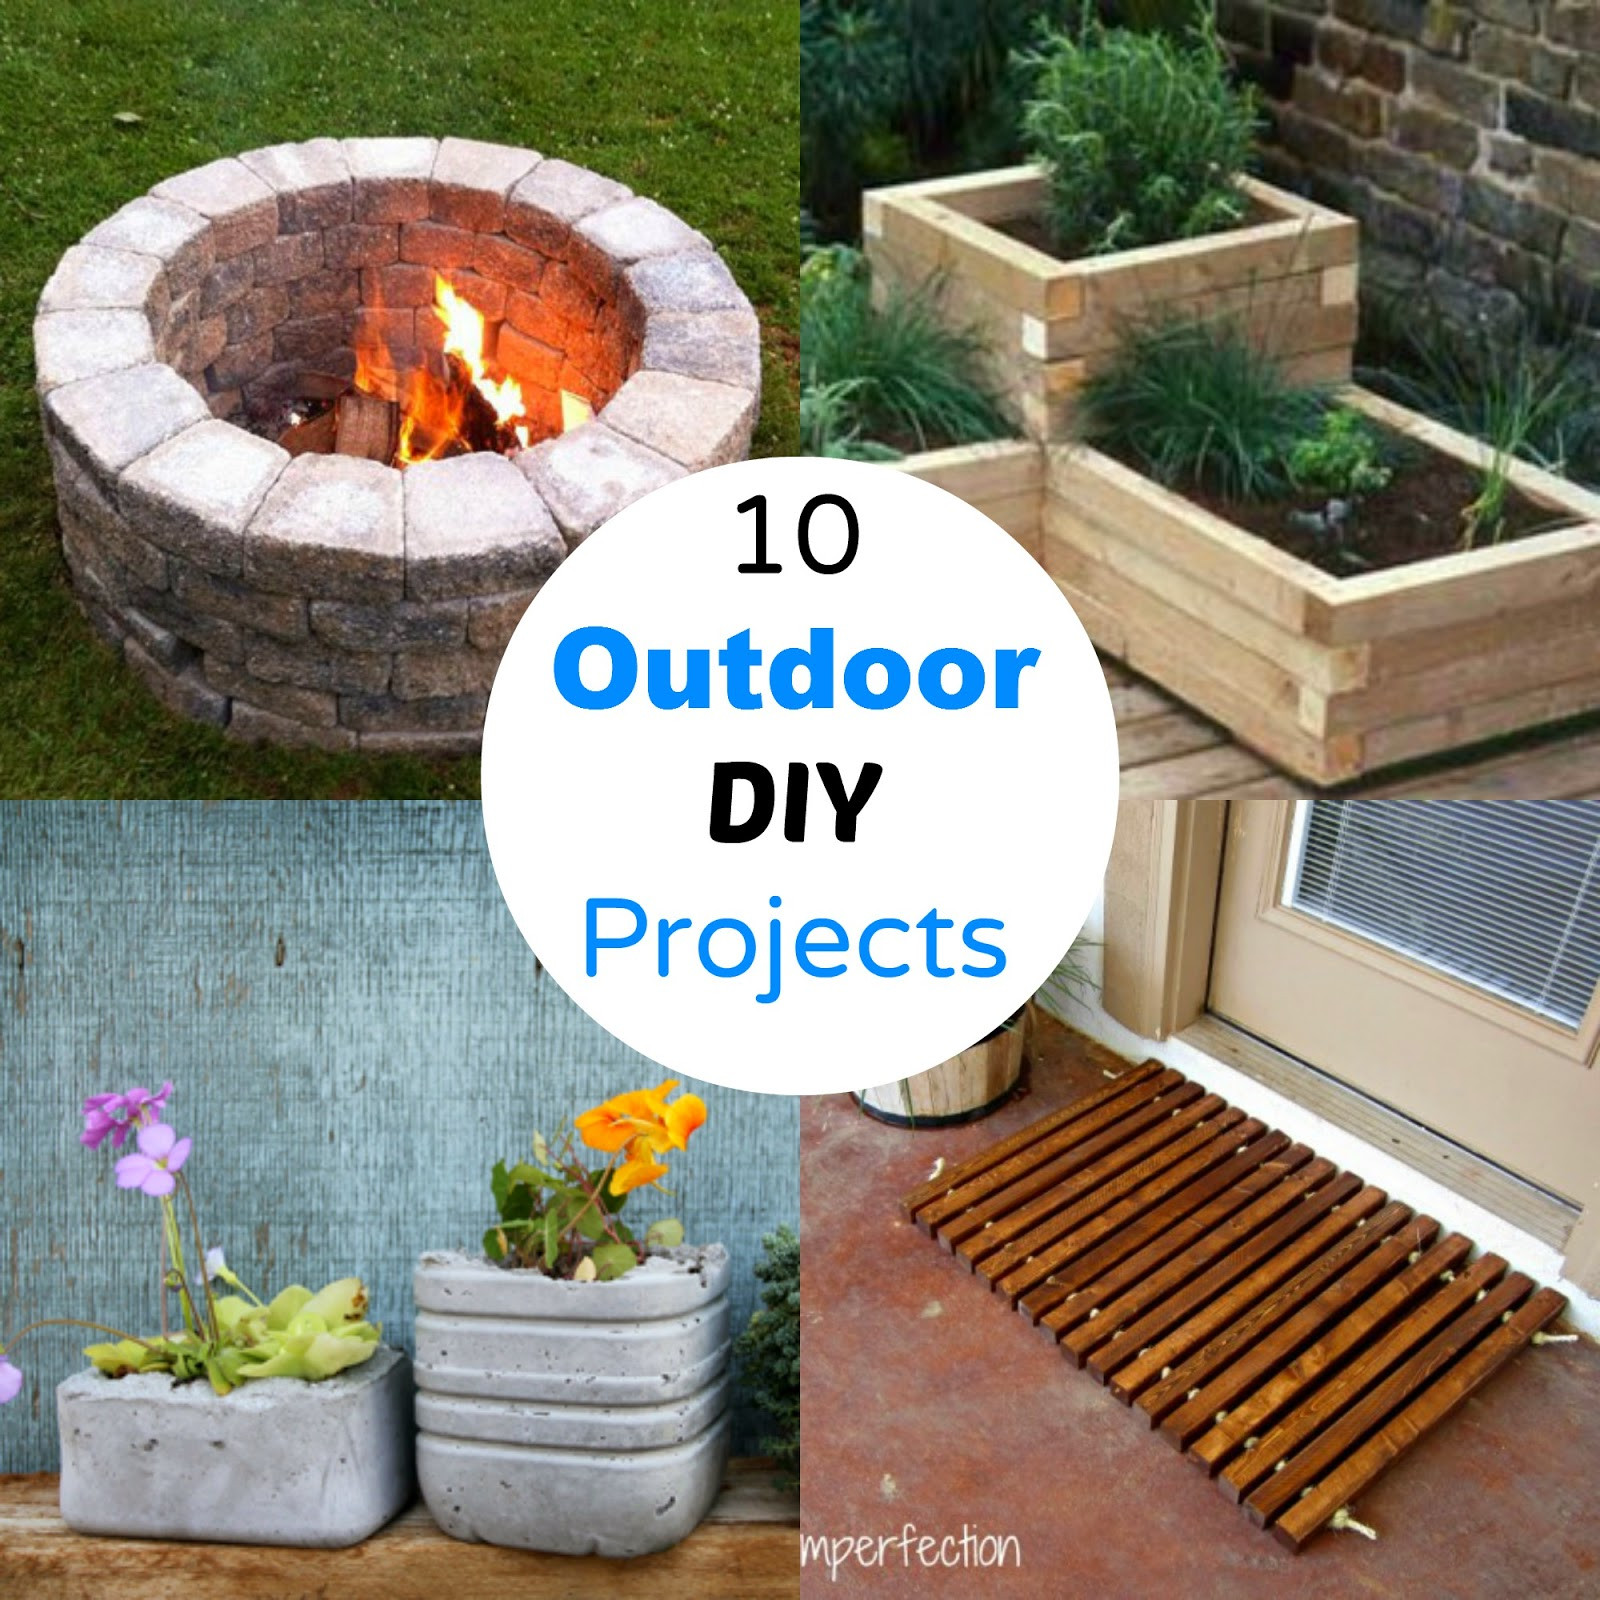 DIY Projects Outdoor
 10 Outdoor DIY Projects